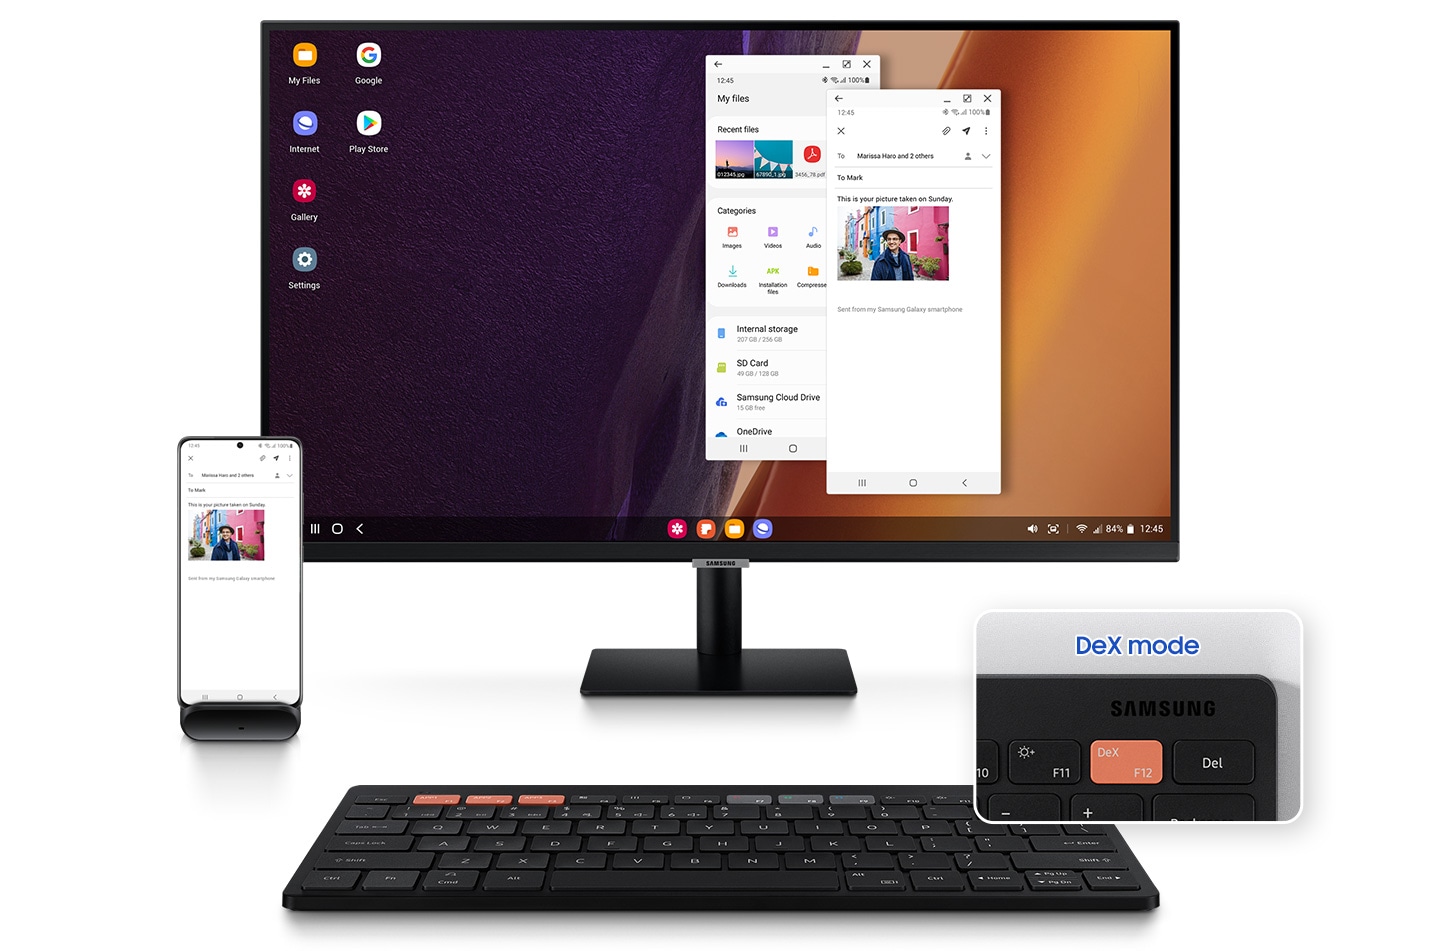 There is a black-colored Samsung Smart Keyboard Trio 500 and a monitor above the keyboard on which there are two apps that appear to be opened; one is an email app and the other one is a picture list app. Beside a monitor, there is a smartphone placed on a phone holder, where the same email app is opened. †DeX mode' key button which allows the user to access DeX mode by pressing the F12 button on the keyboard is highlighted on the bottom right side.